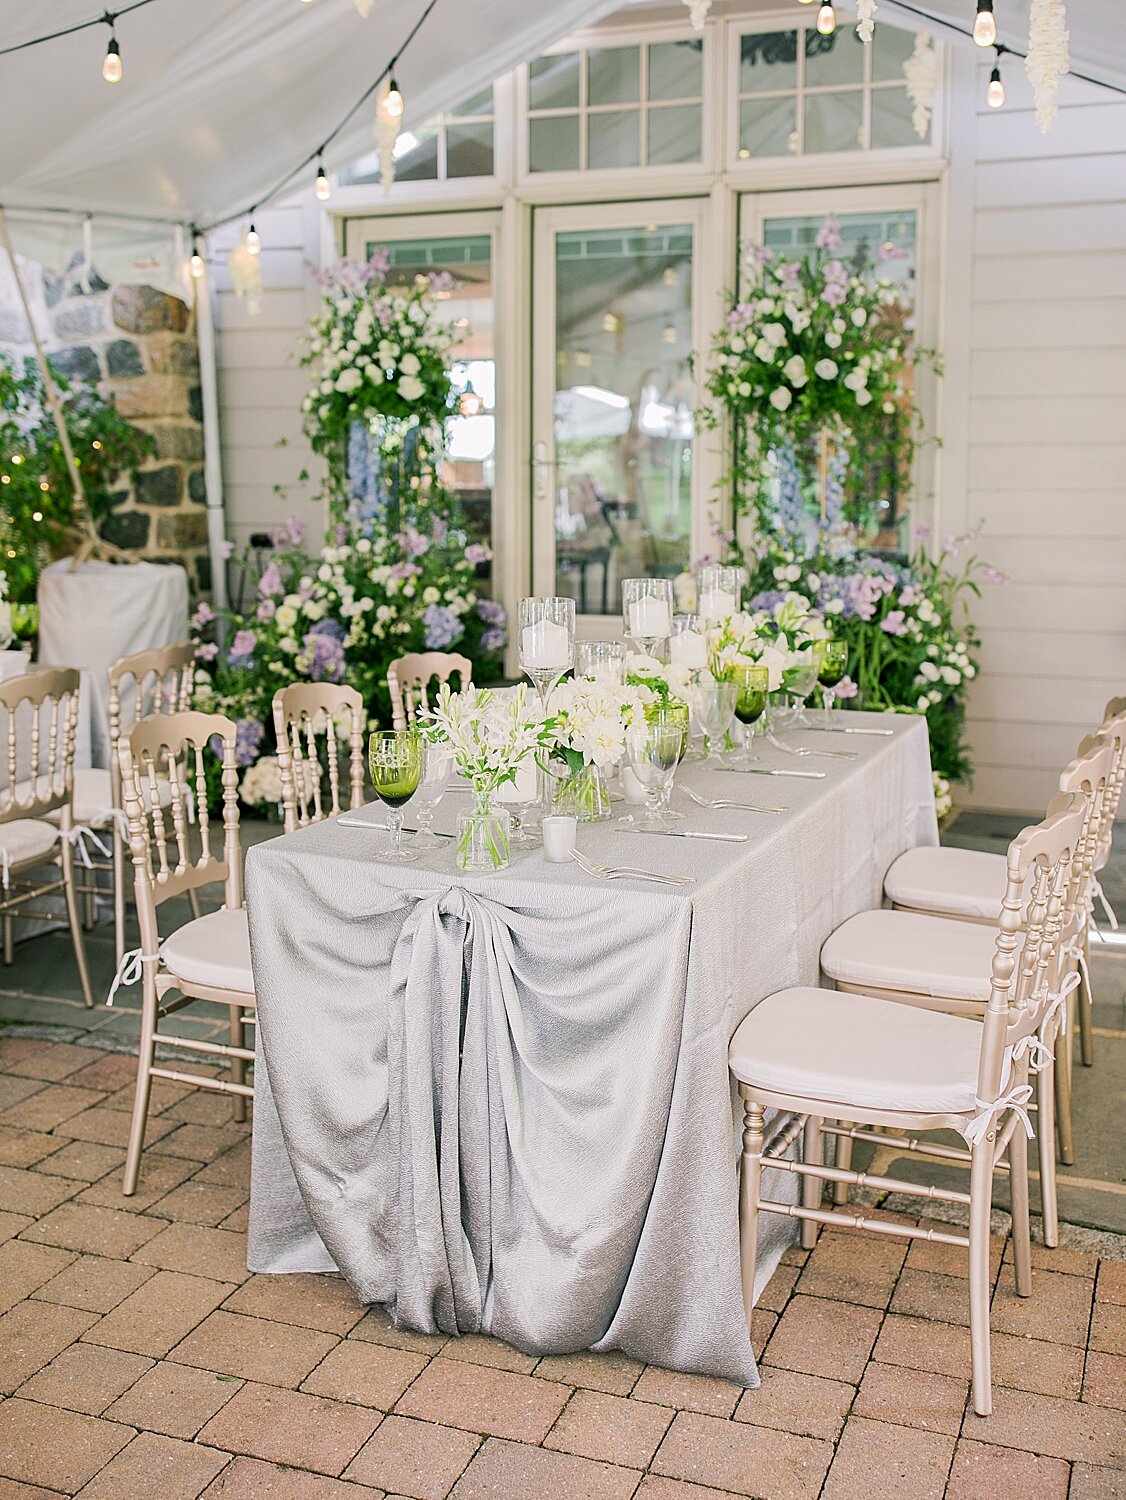 tented wedding reception for private home wedding reception | Stylish Private Home Wedding Inspiration | Asher Gardner Photography